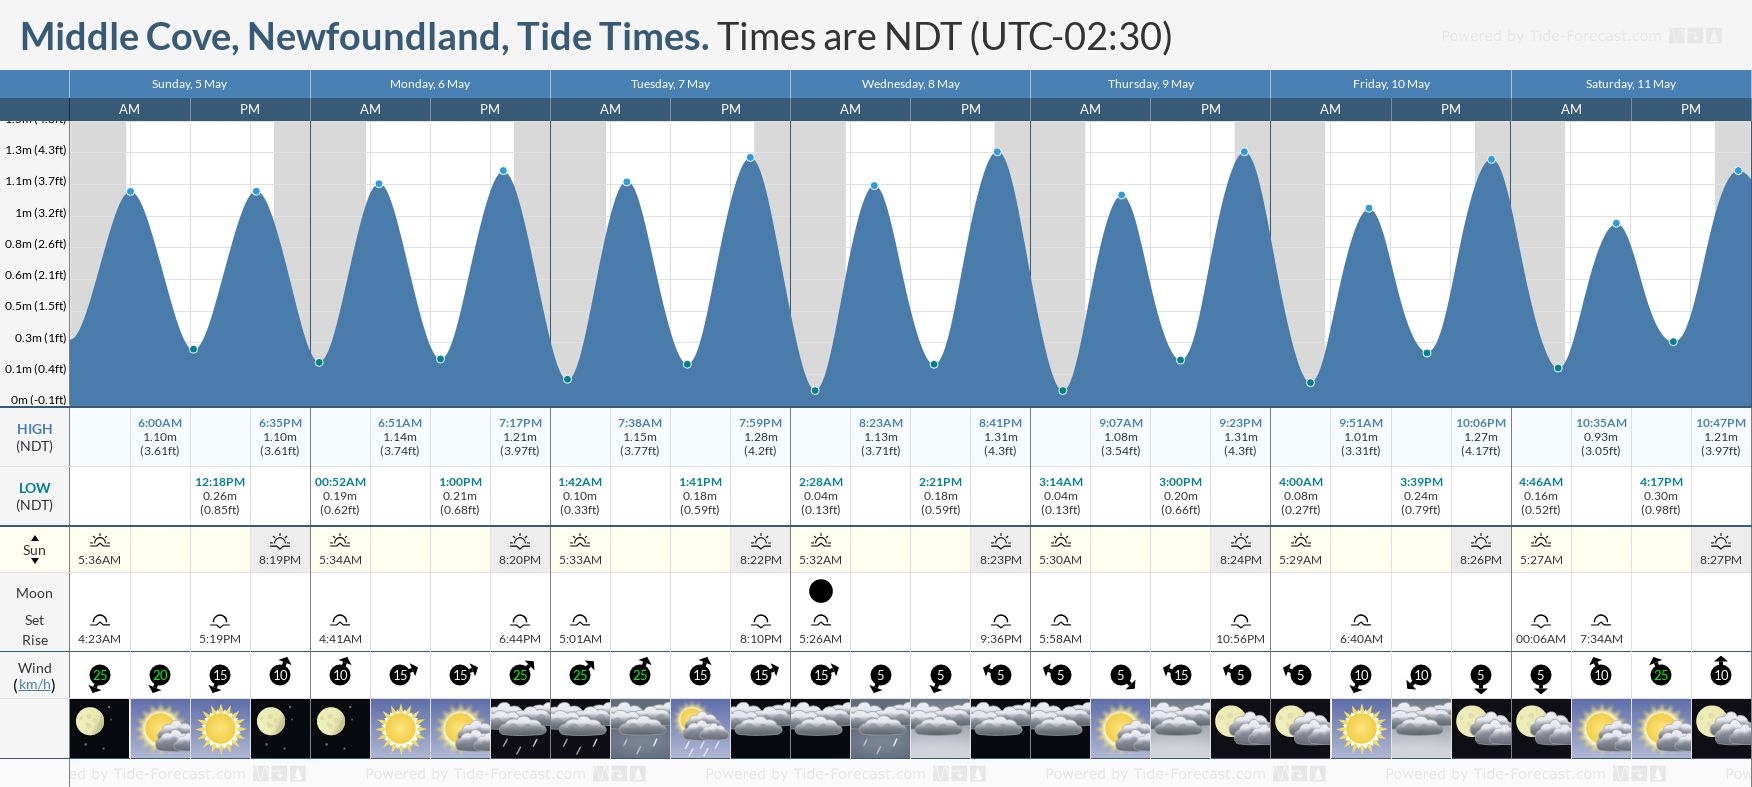 Middle Cove, Newfoundland Tide Chart including high and low tide tide times for the next 7 days